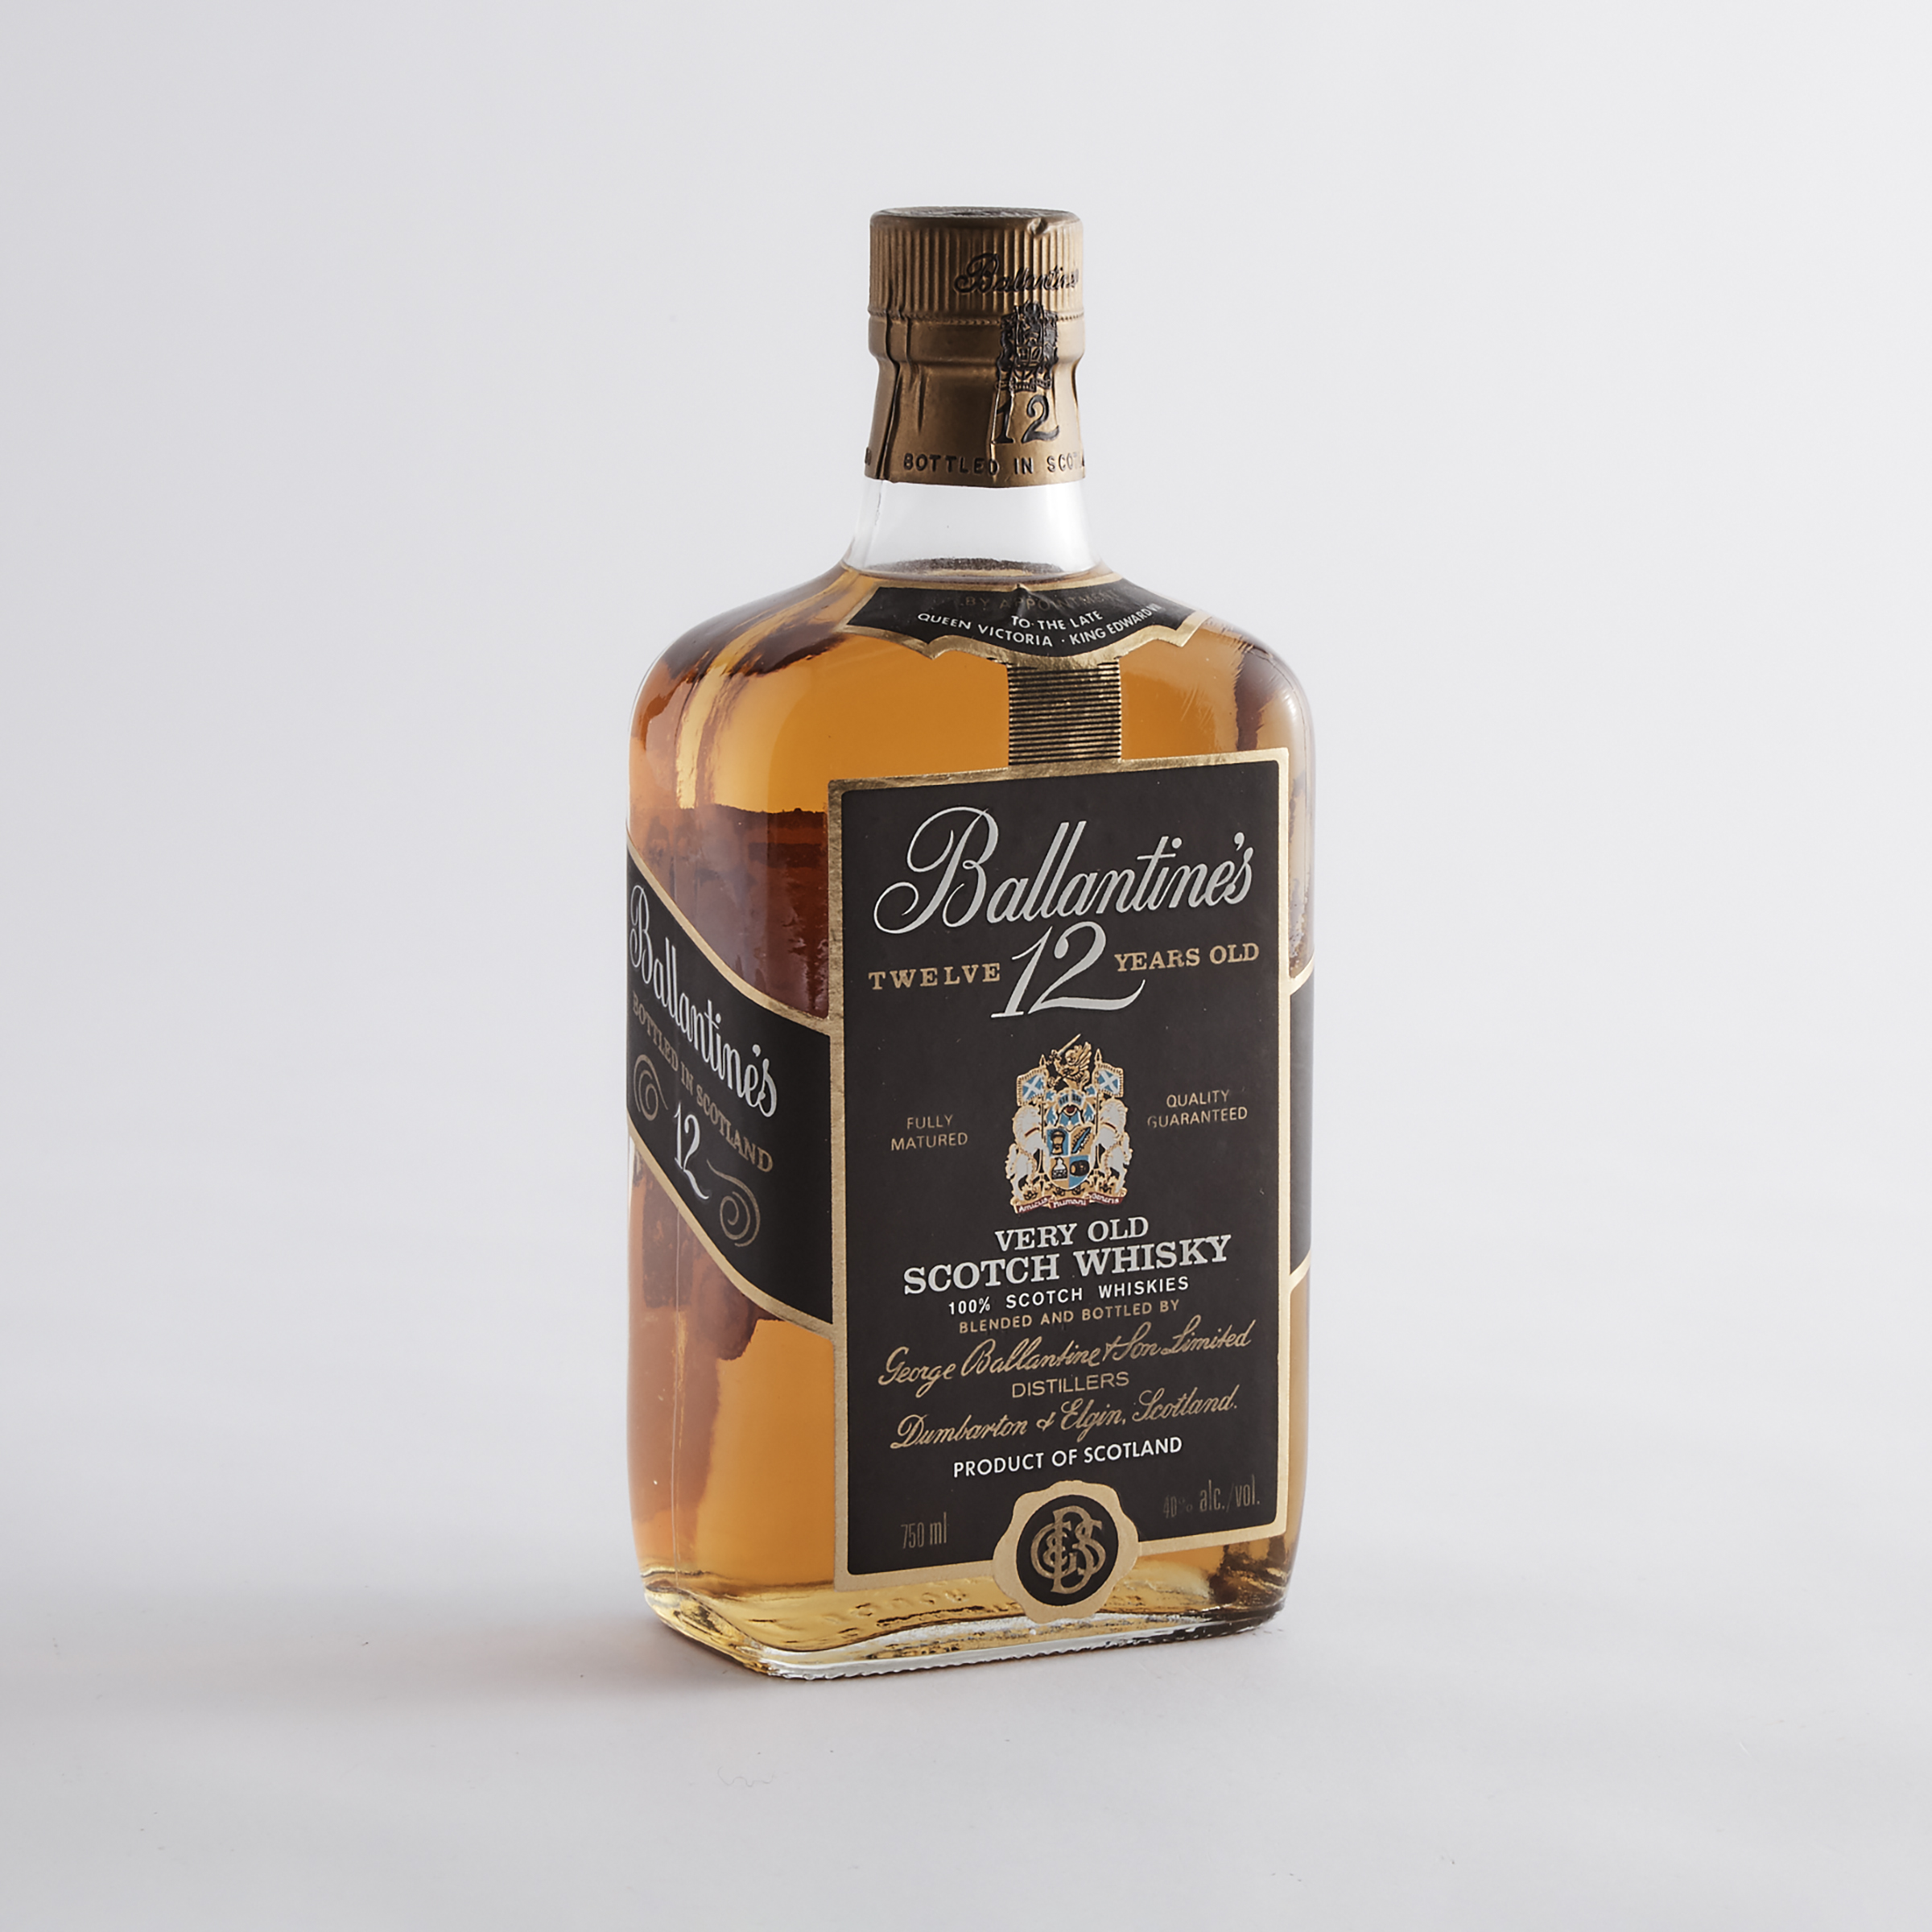 BALLANTINE'S VERY OLD BLENDED SCOTCH WHISKY 12 YEARS (ONE 750 ML)